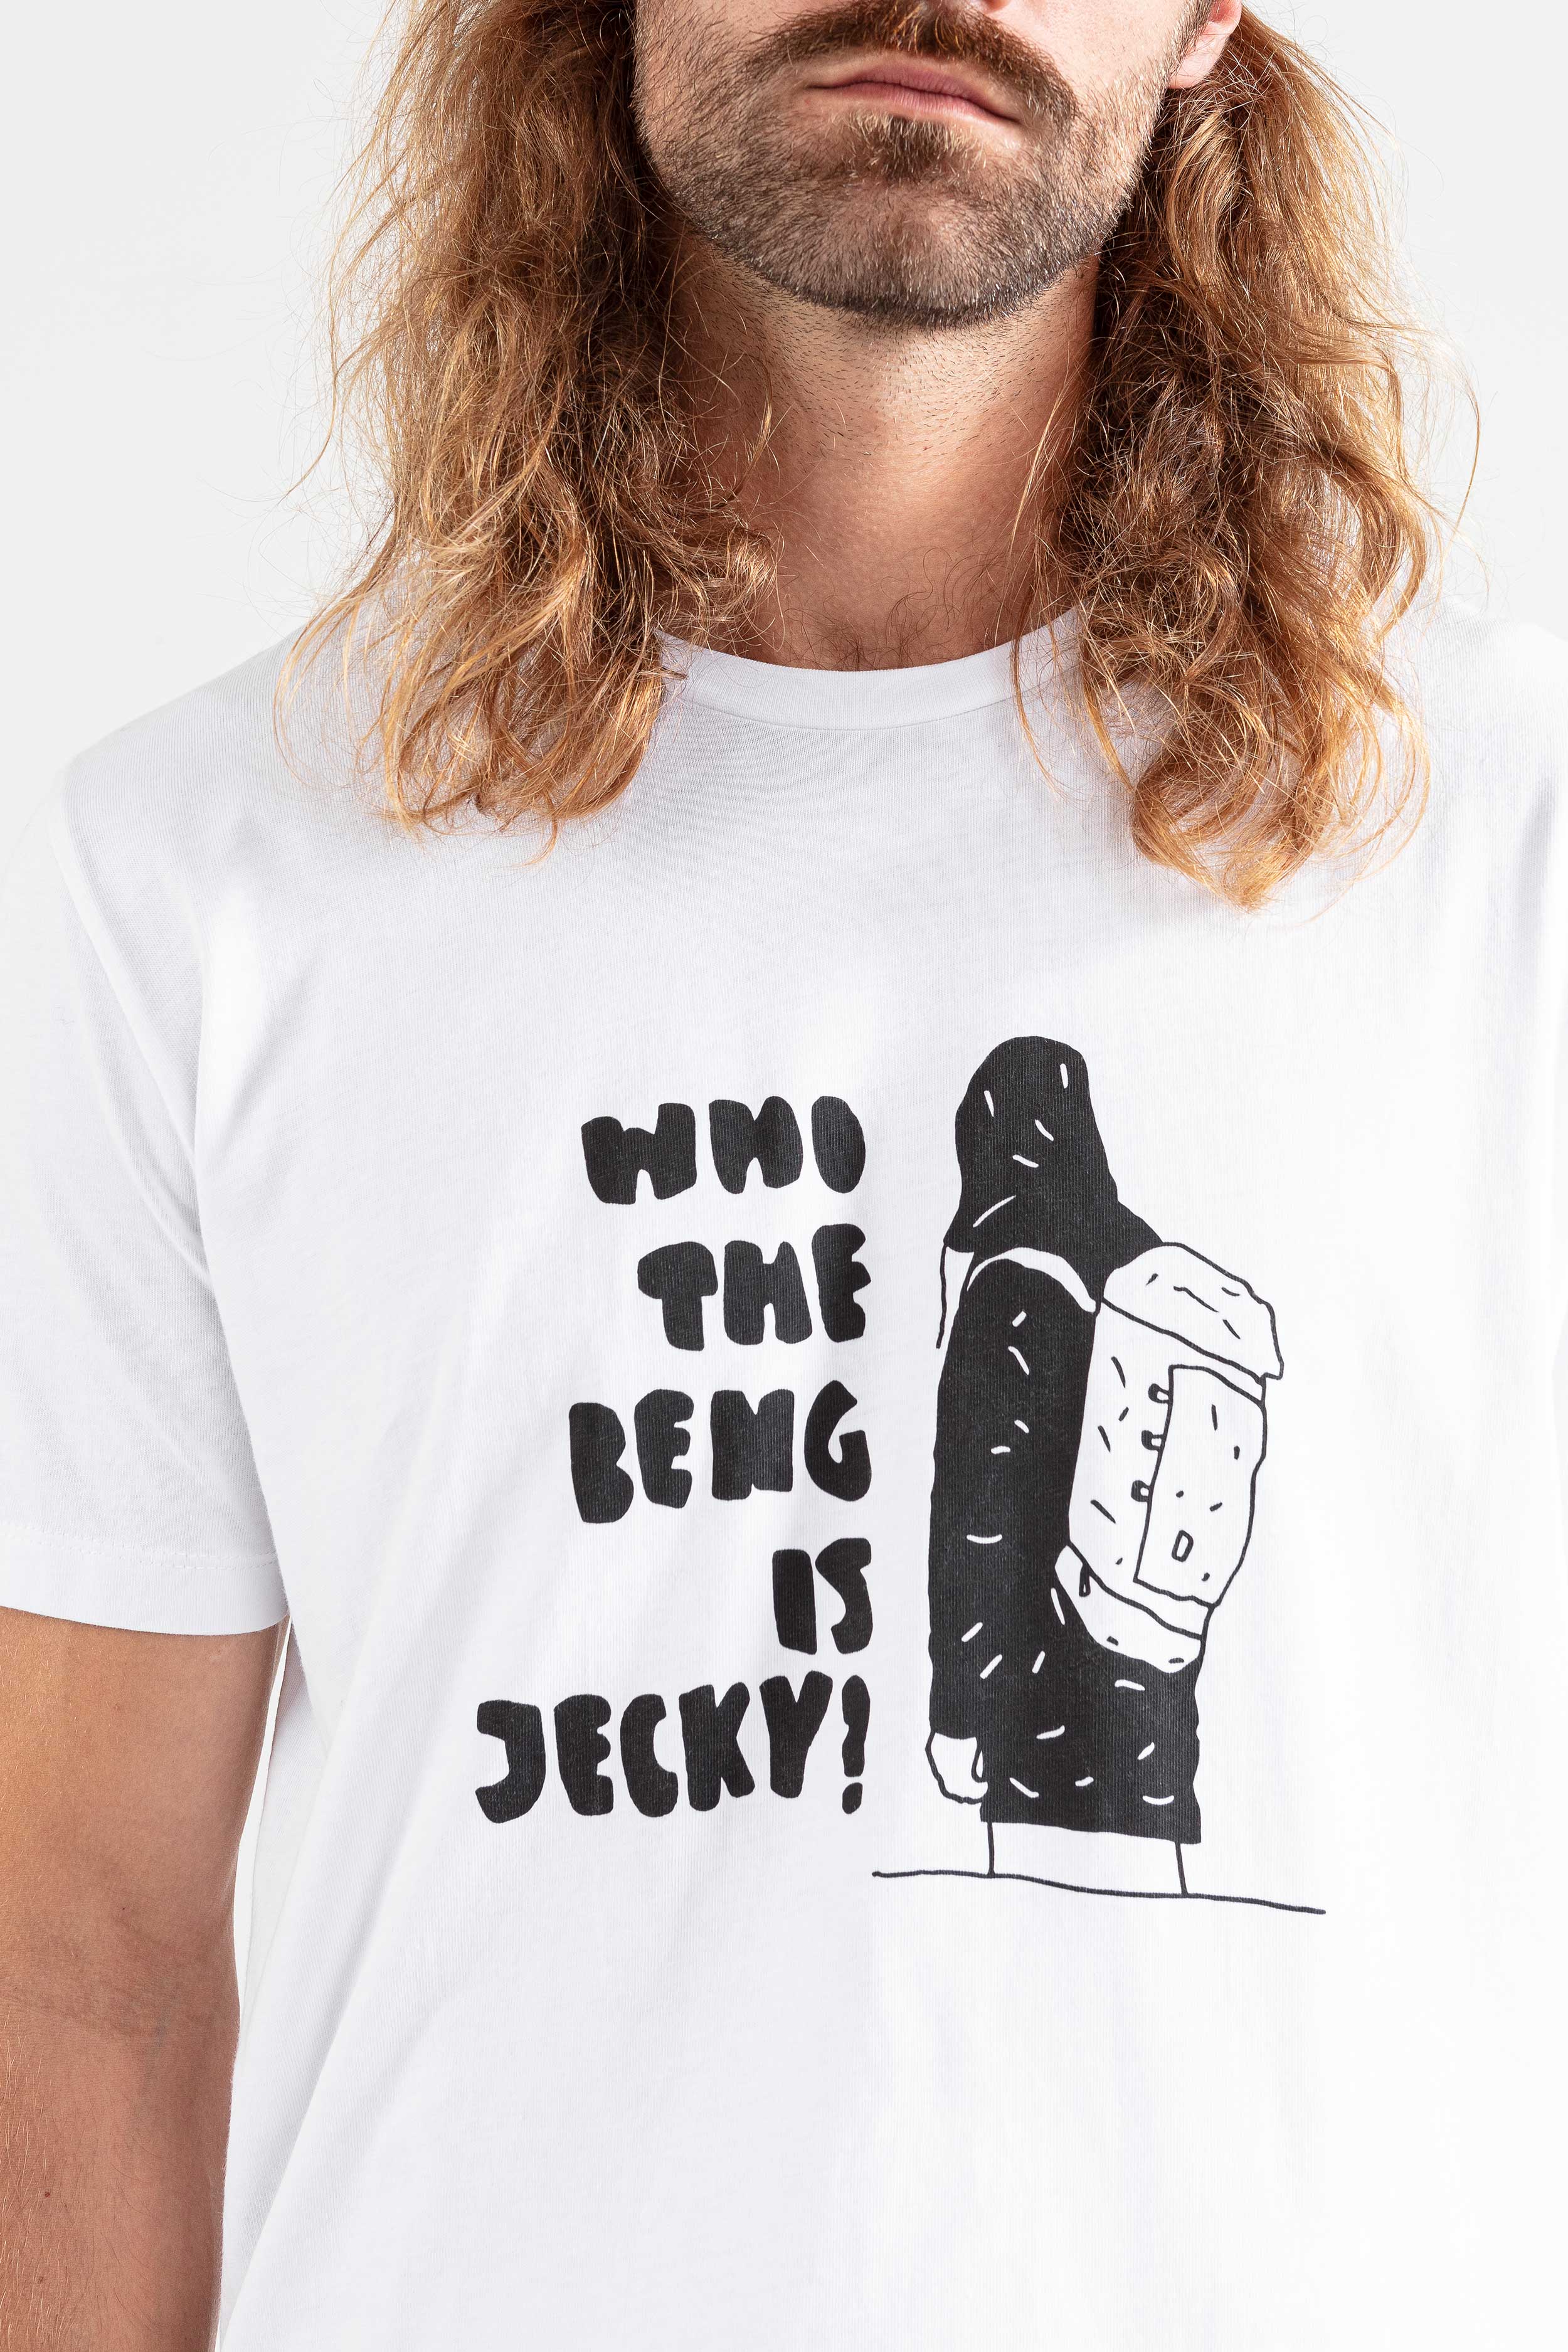 JECKYBENG-WHO-THE-BENG-IS-JECKY-T-Shirt-03 white